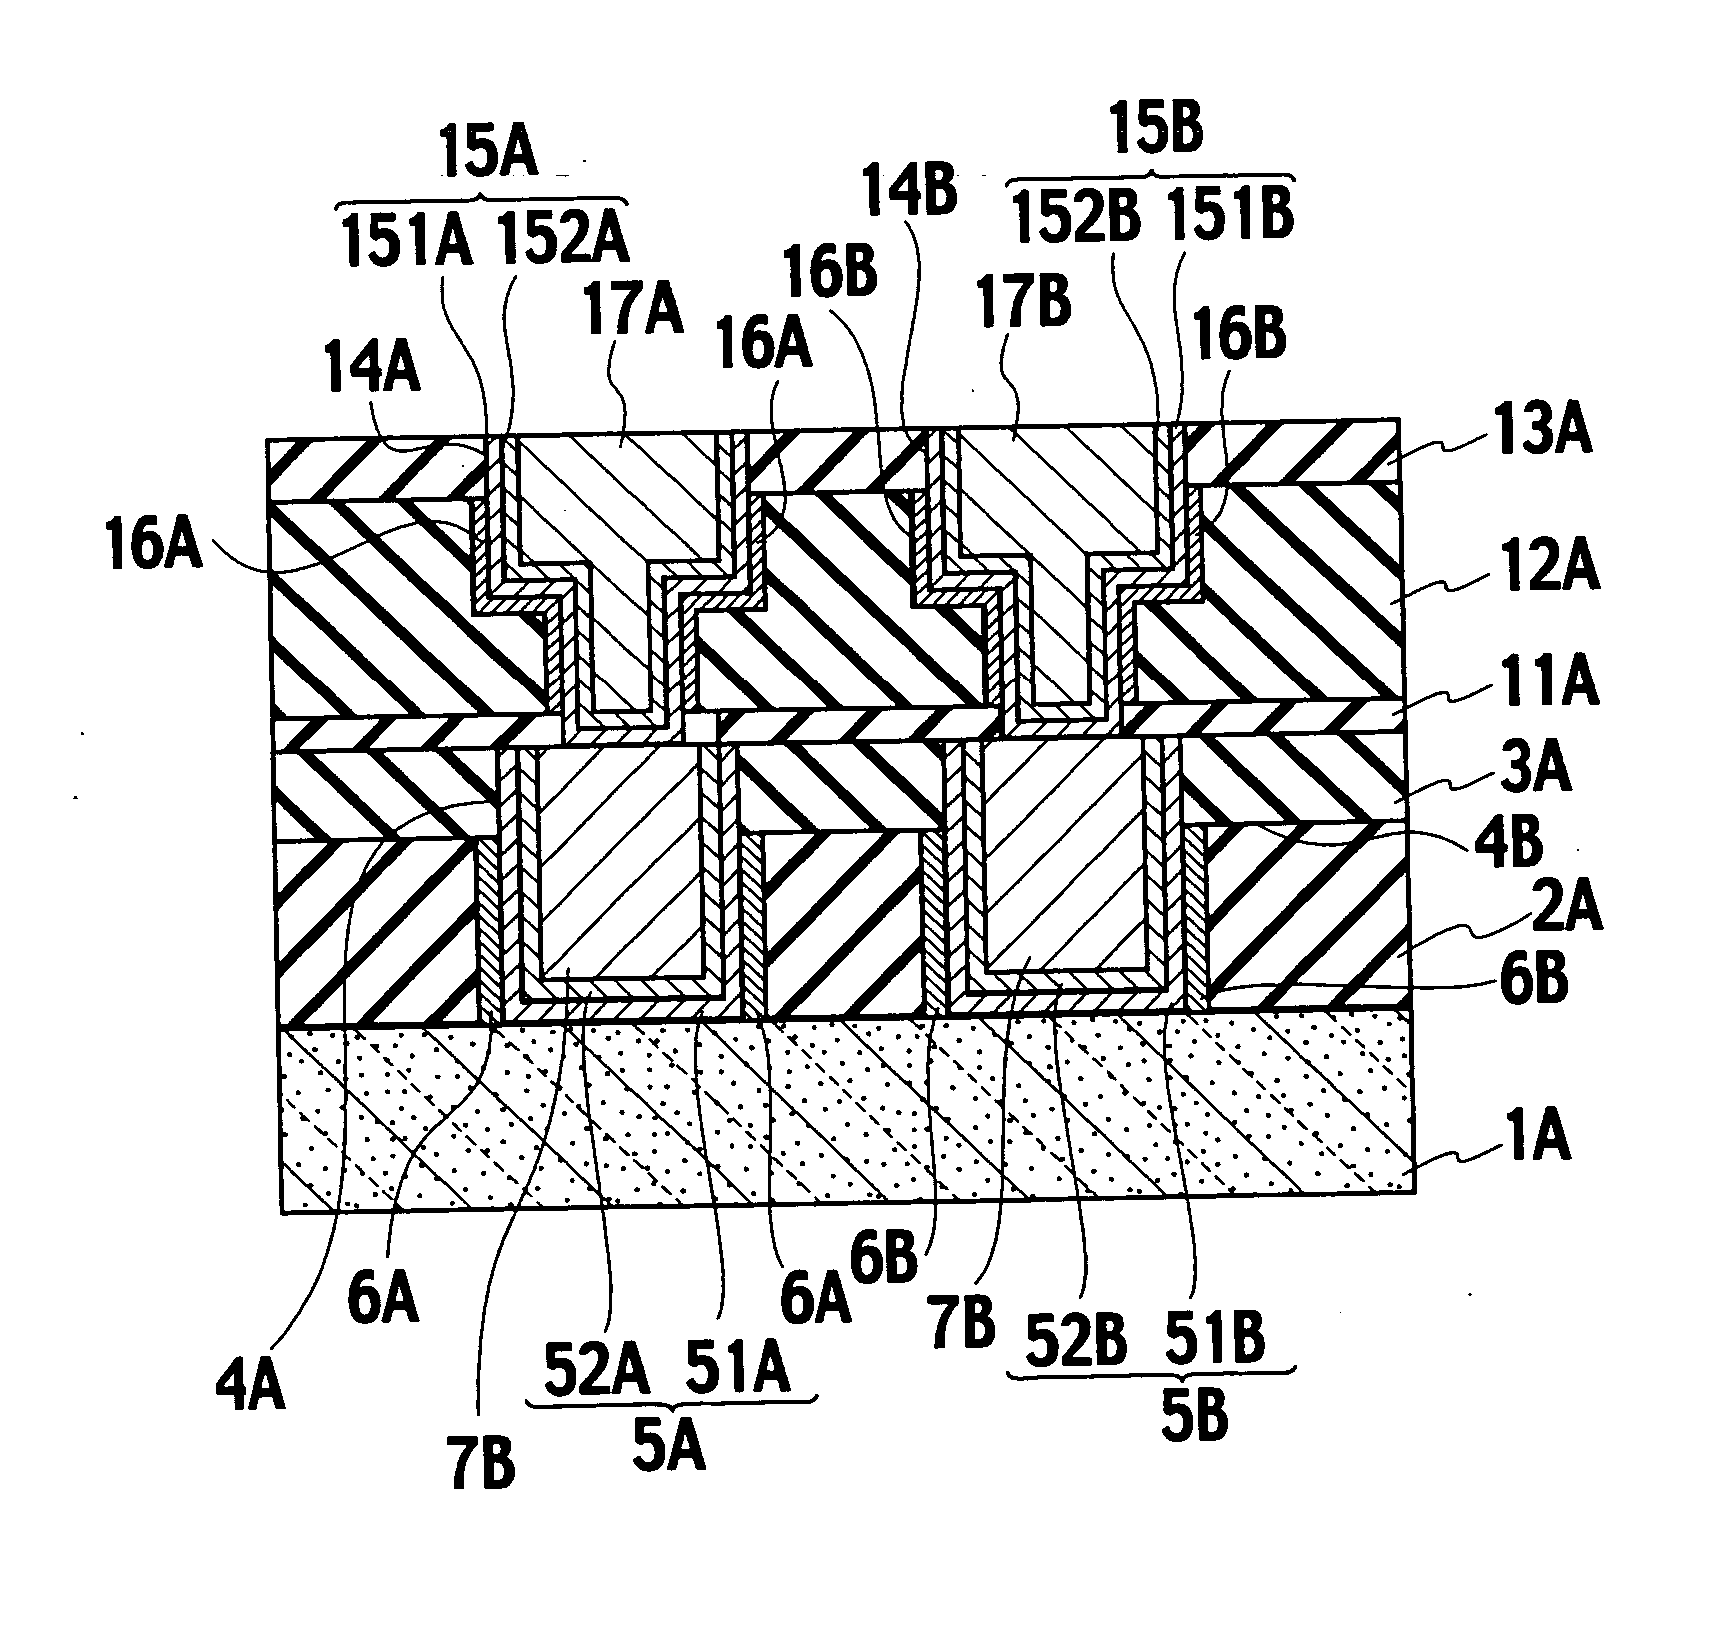 Semiconductor device and a method of fabricating a semiconductor device